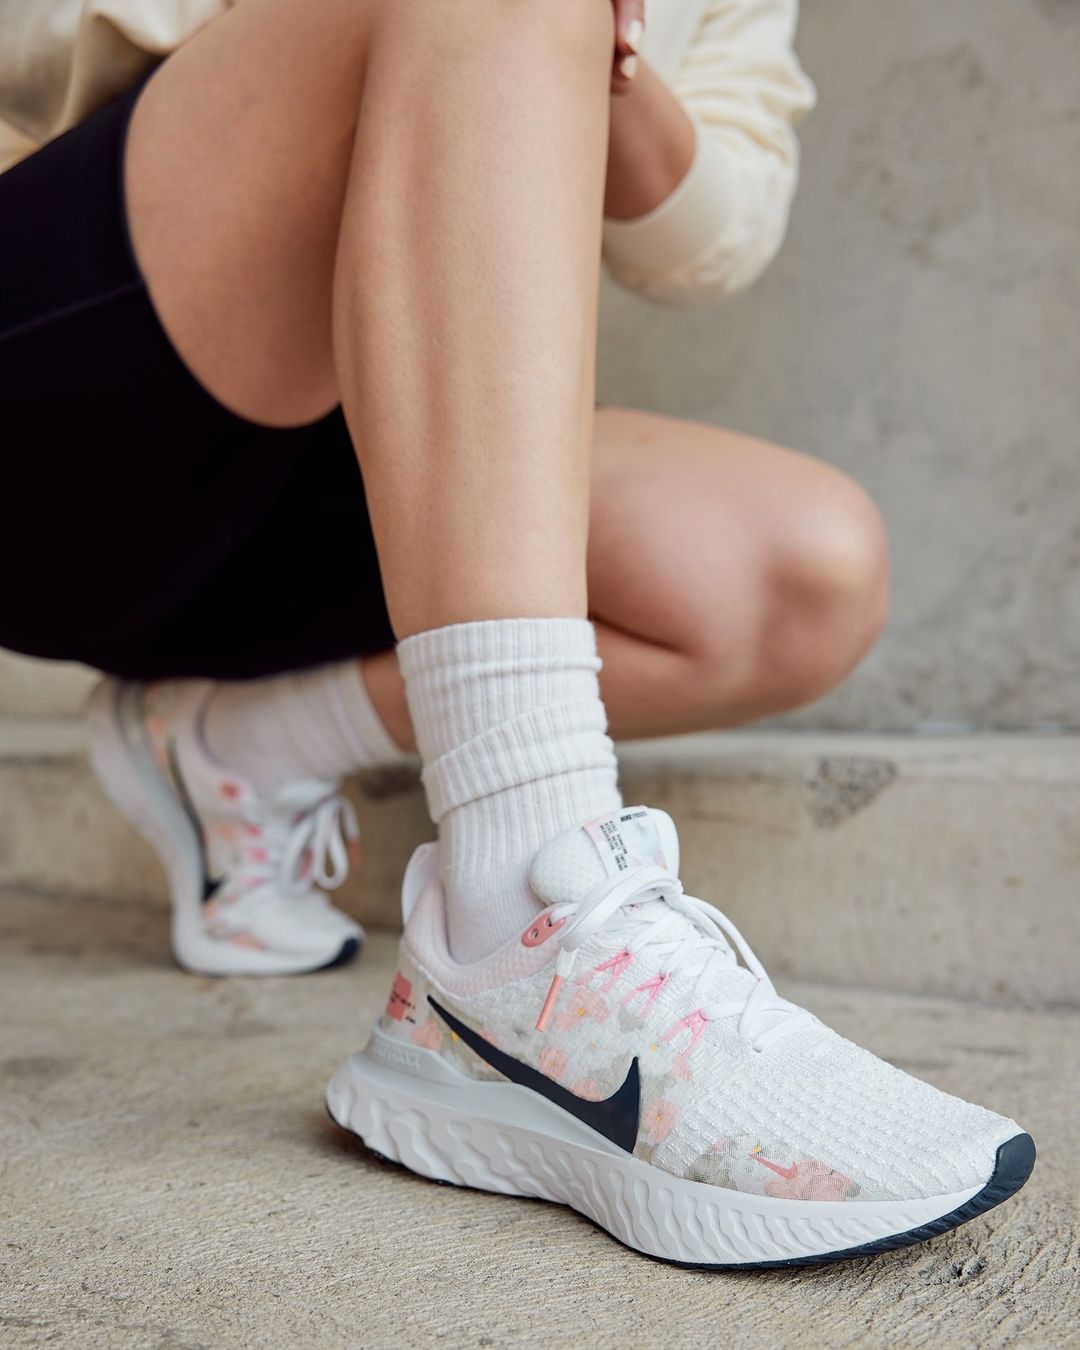 GIÀY THỂ THAO NIKE NỮ REACT INFINITY 3 PREMIUM WHITE PEARL PINK WOMENS ROAD RUNNING SHOES FD4151-100 6